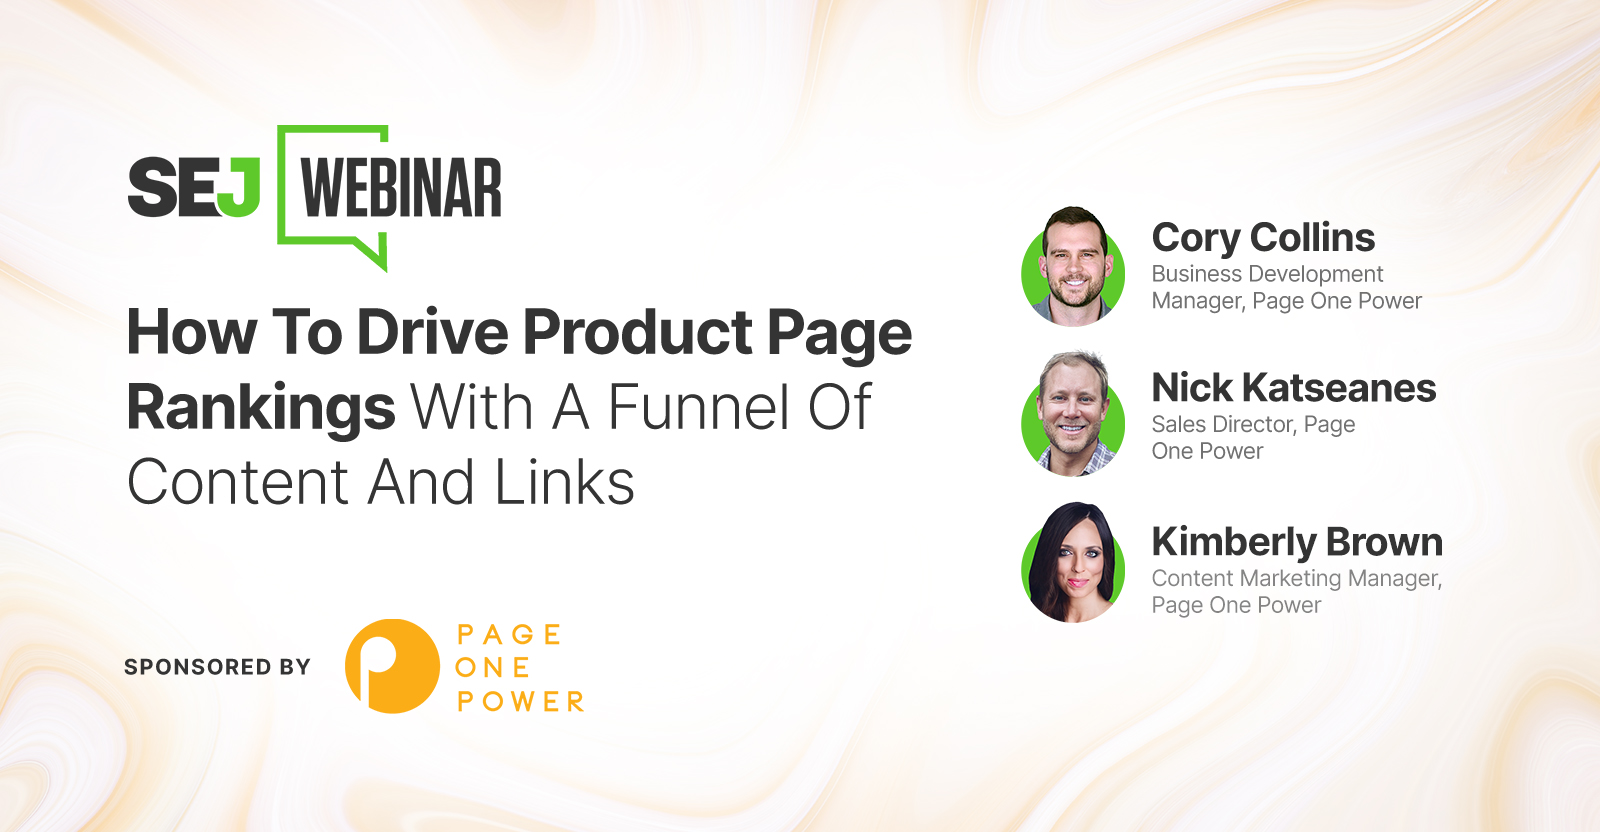 How To Drive Product Page Rankings With A Funnel Of Content & Links